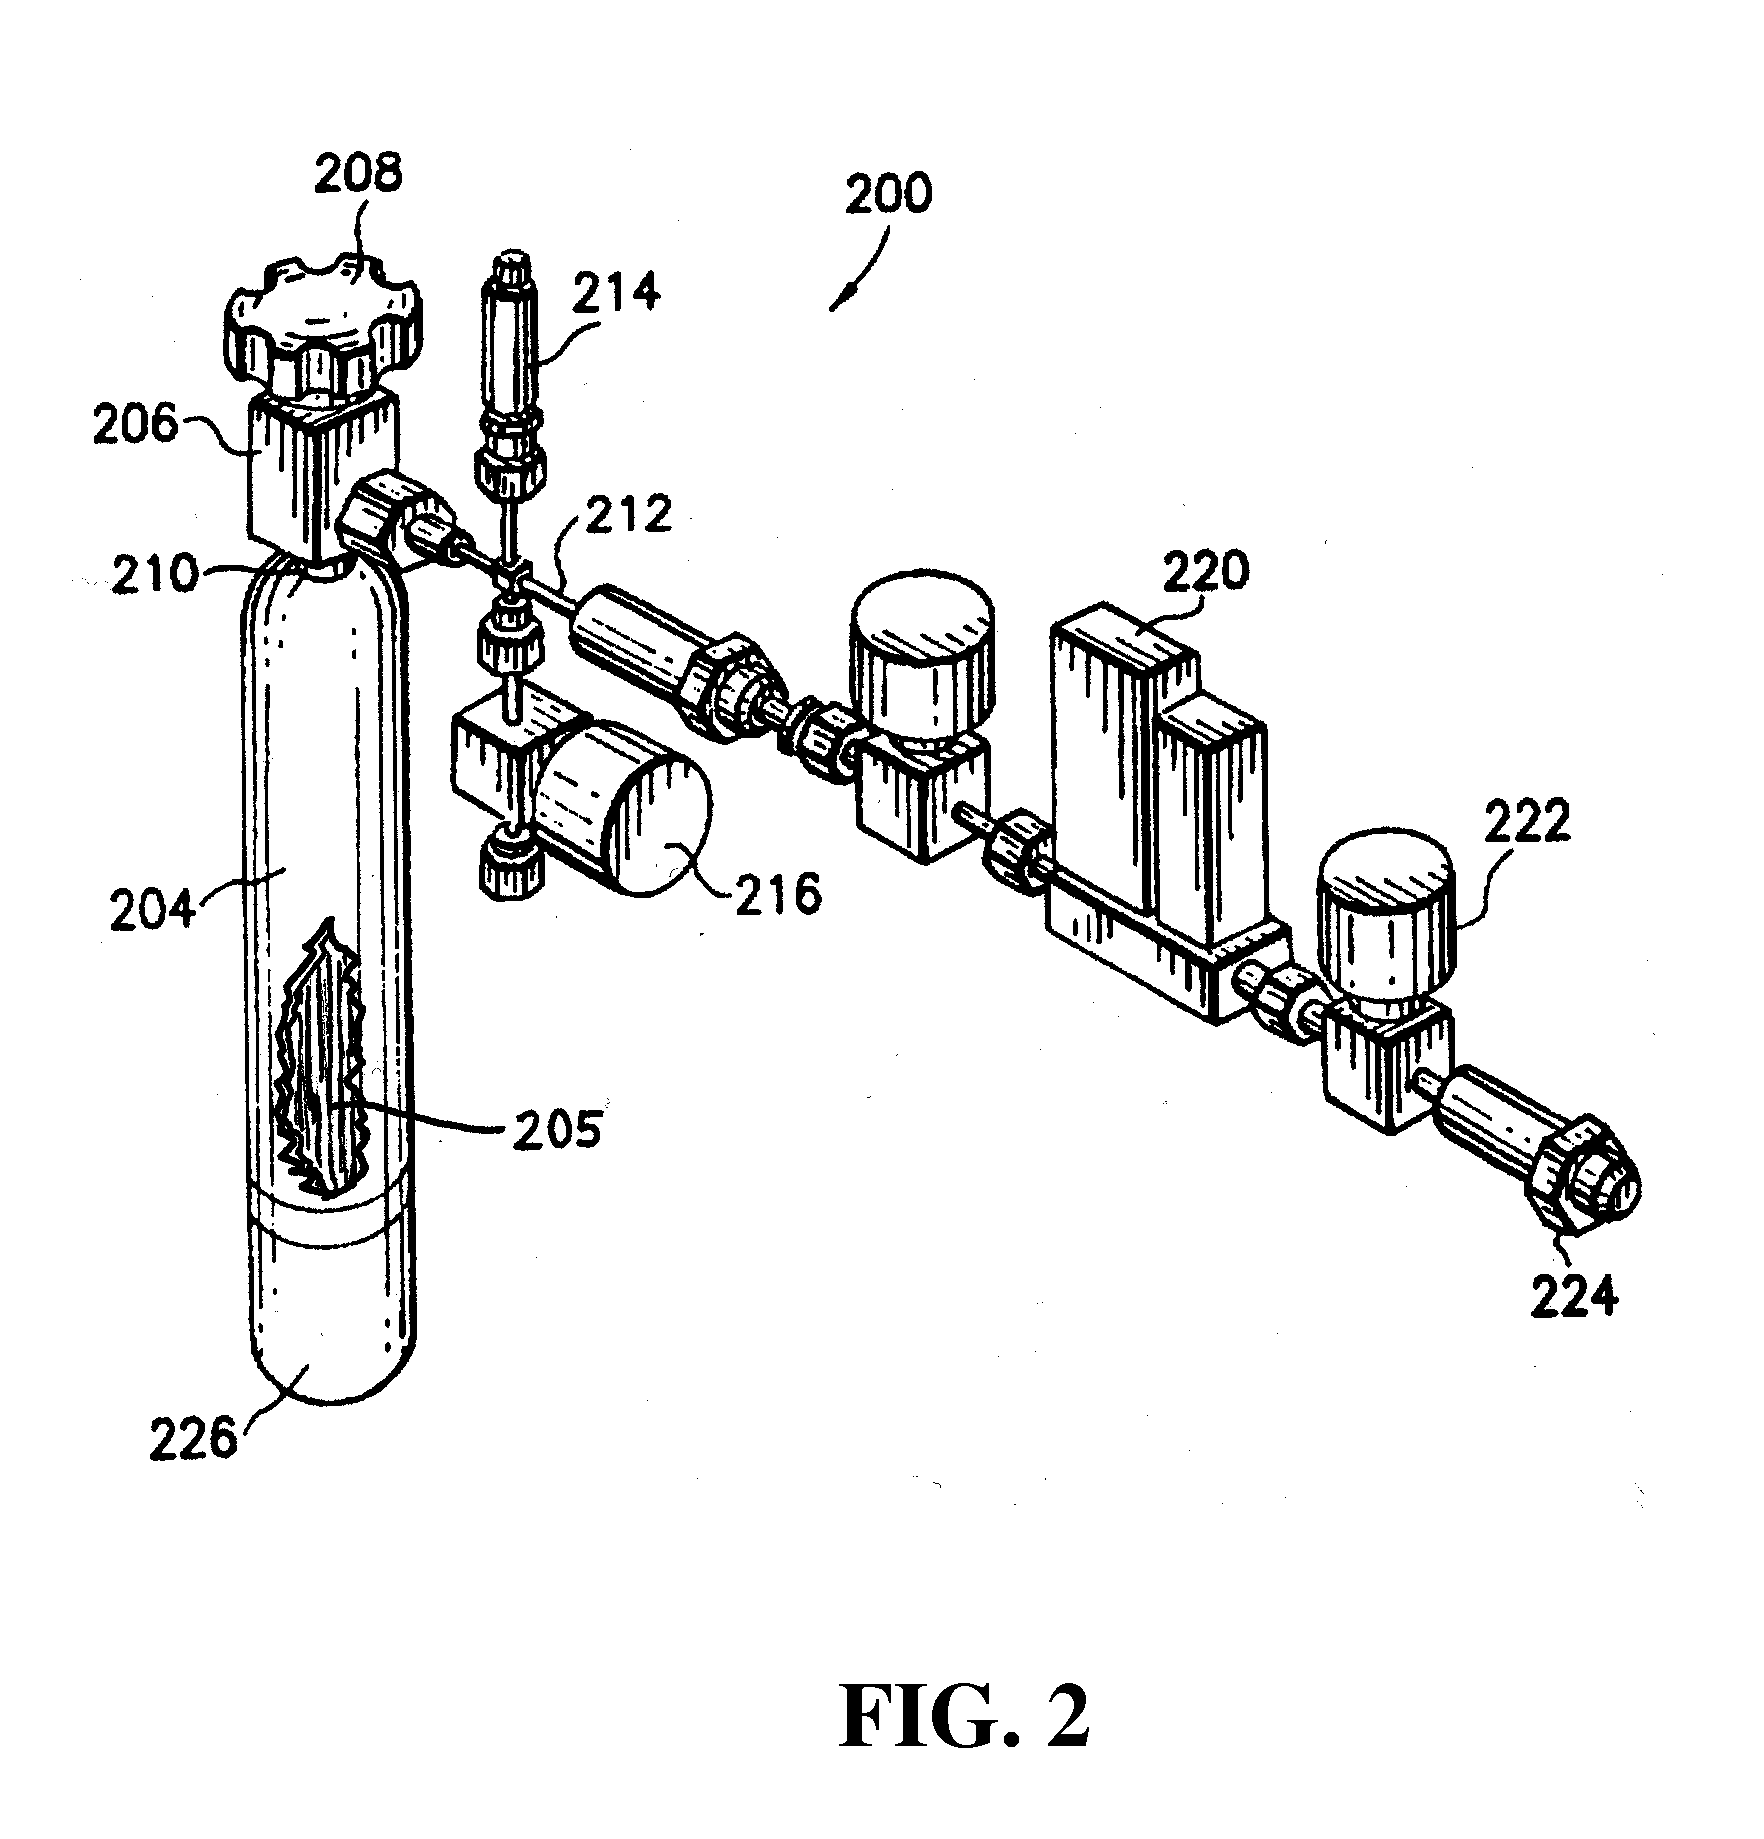 Pvdf pyrolyzate adsorbent and gas storage and dispensing system utilizing same